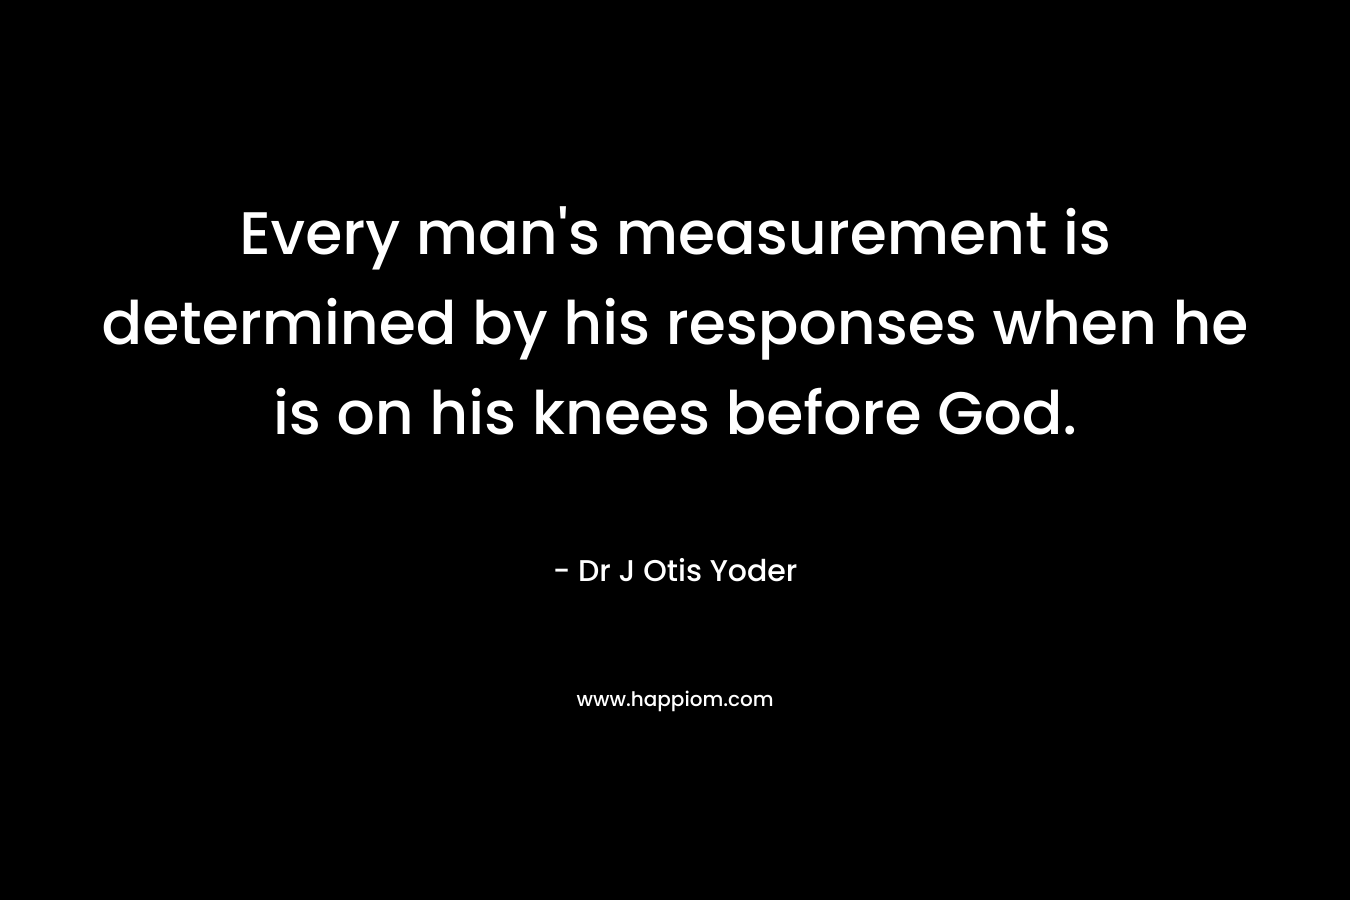 Every man’s measurement is determined by his responses when he is on his knees before God. – Dr J Otis Yoder